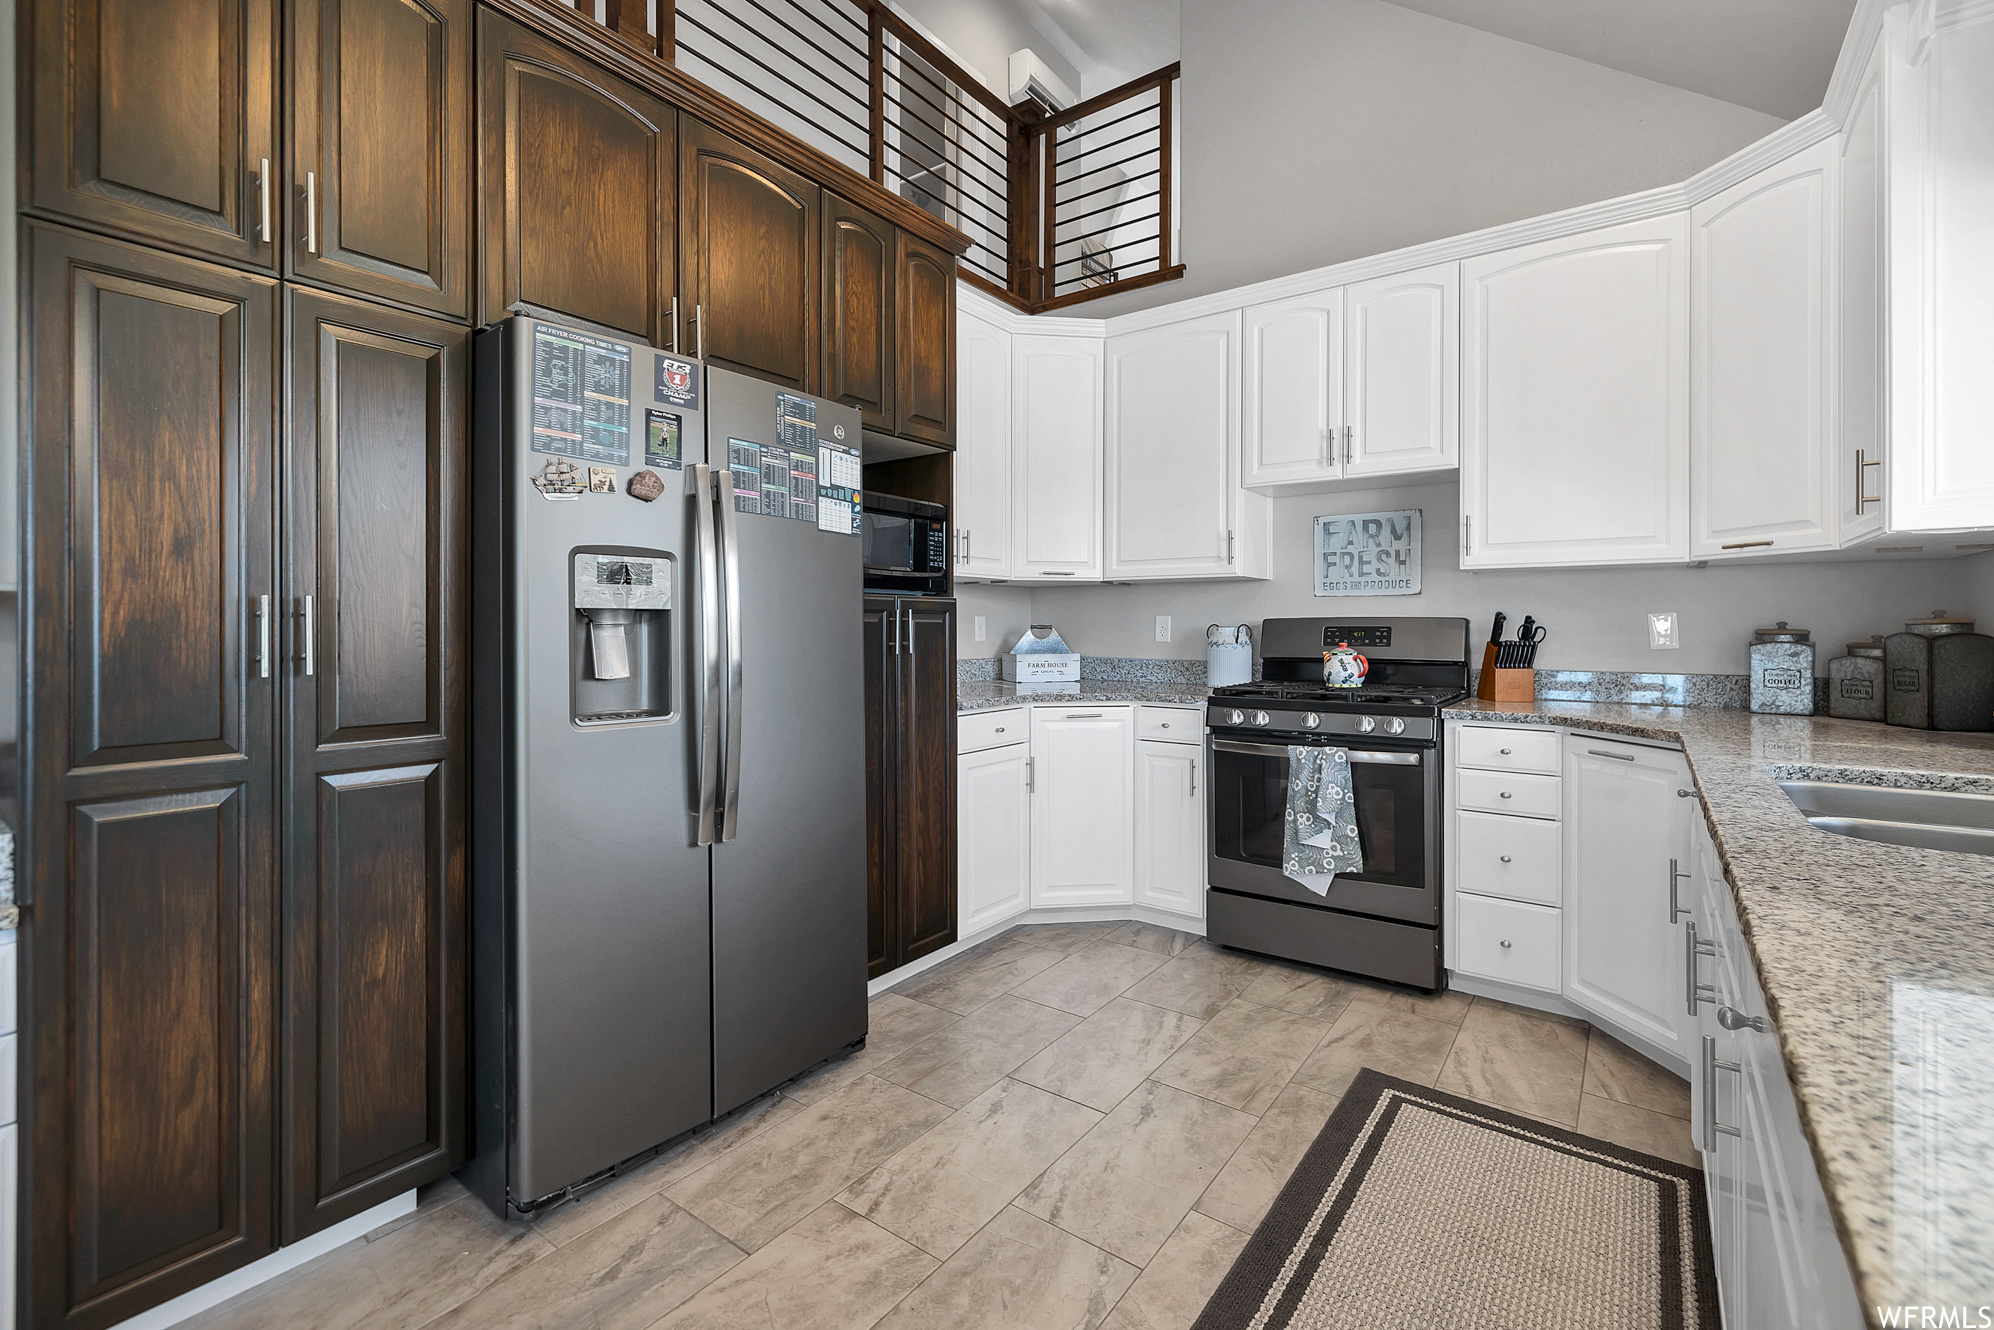 Kitchen with refrigerator, range oven, light tile flooring, and white cabinetry